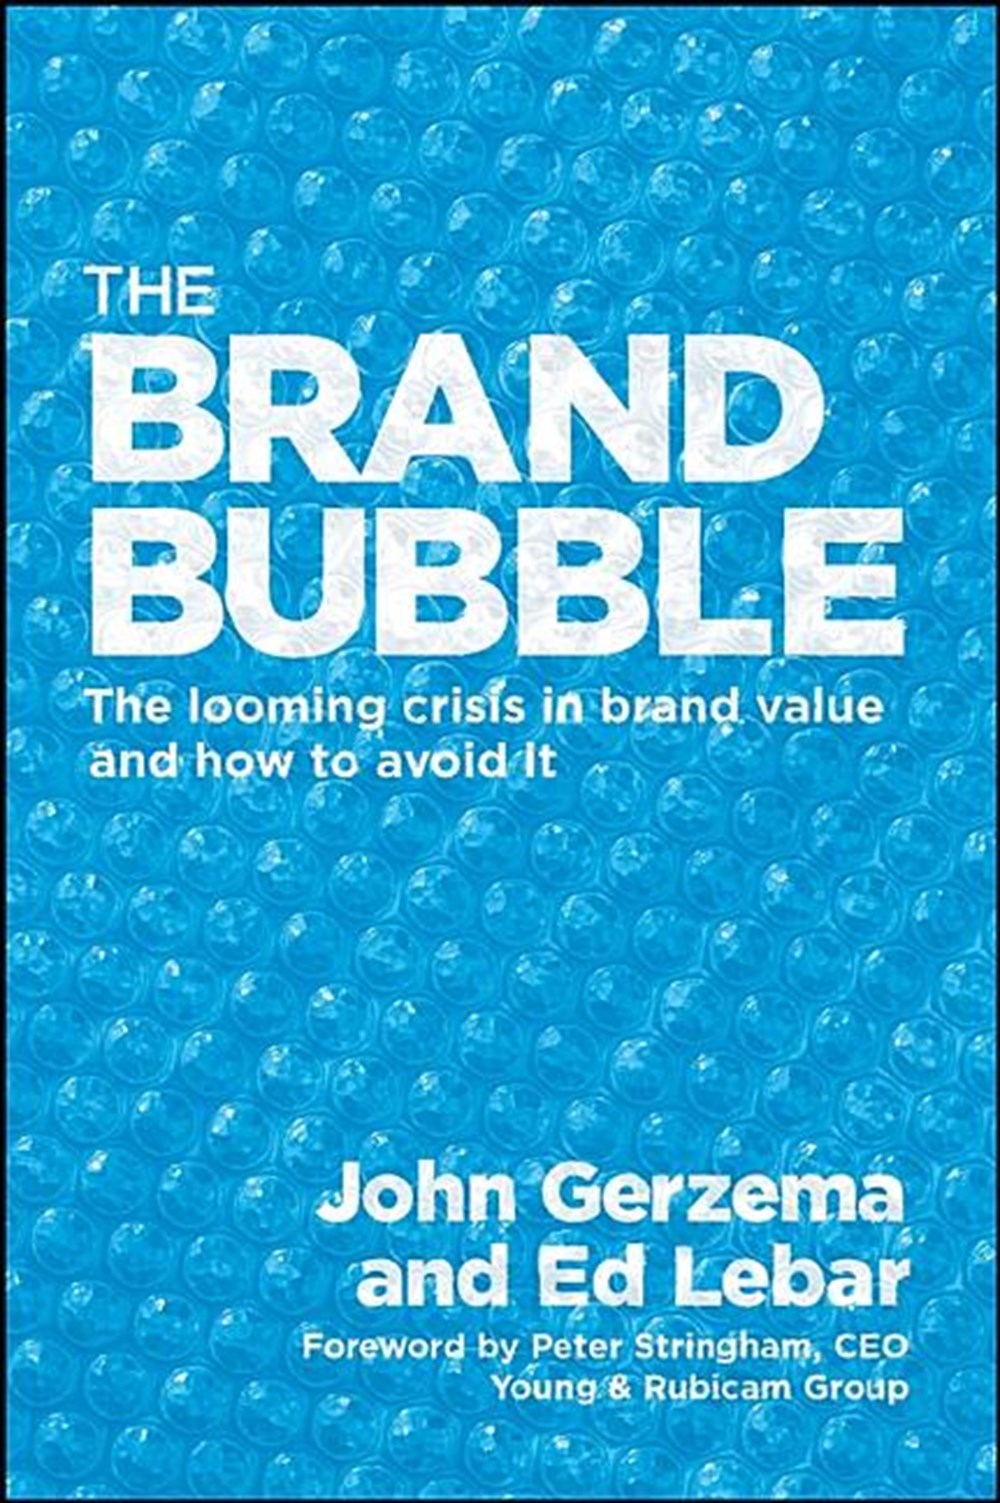 Brand Bubble: The Looming Crisis in Brand Value and How to Avoid It